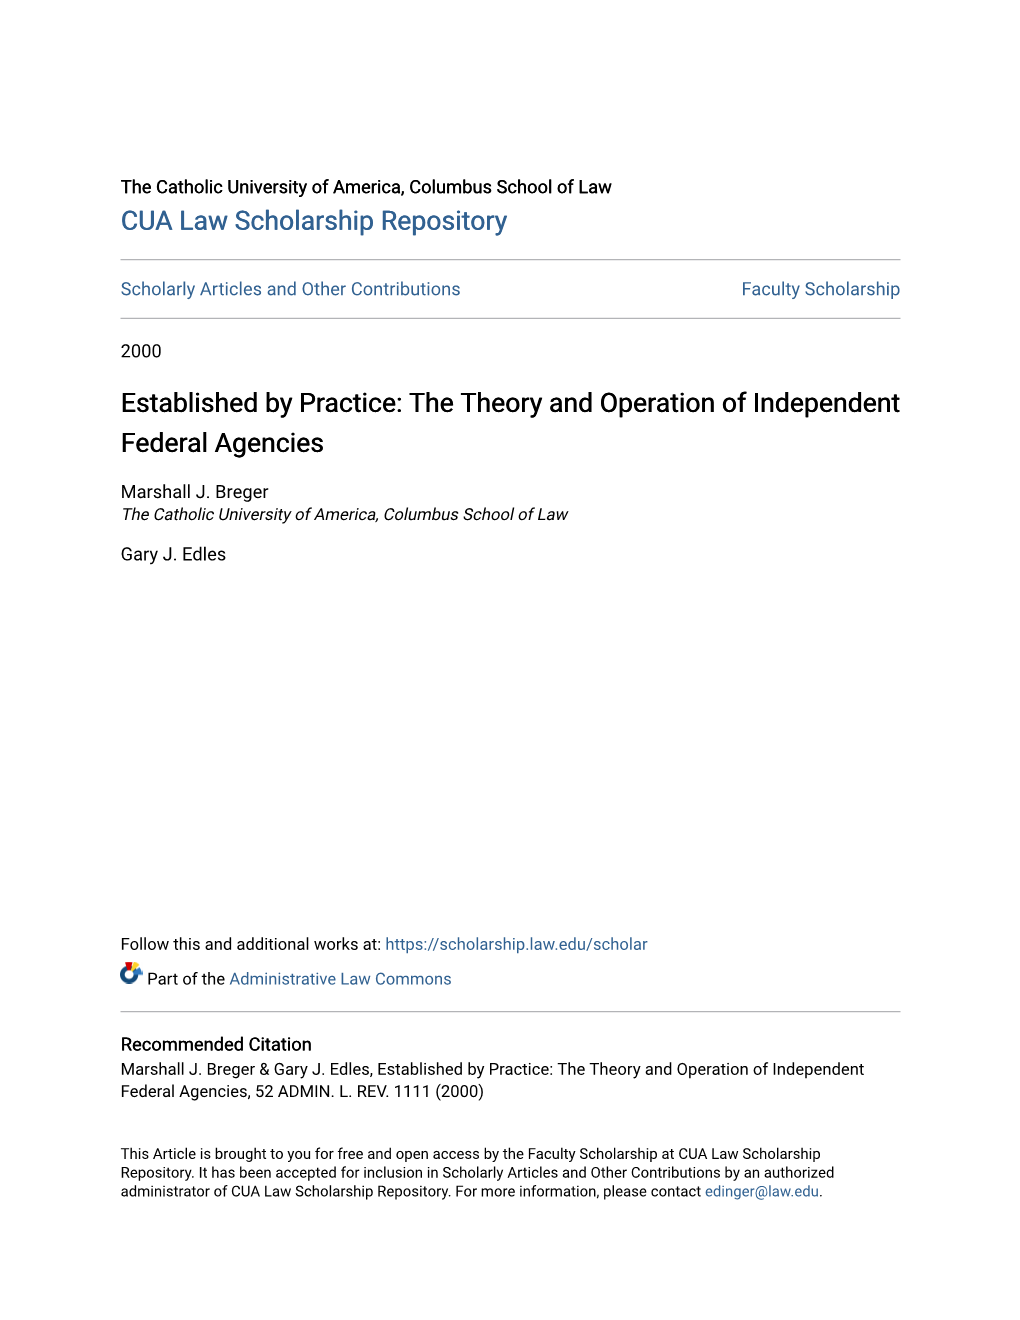 The Theory and Operation of Independent Federal Agencies